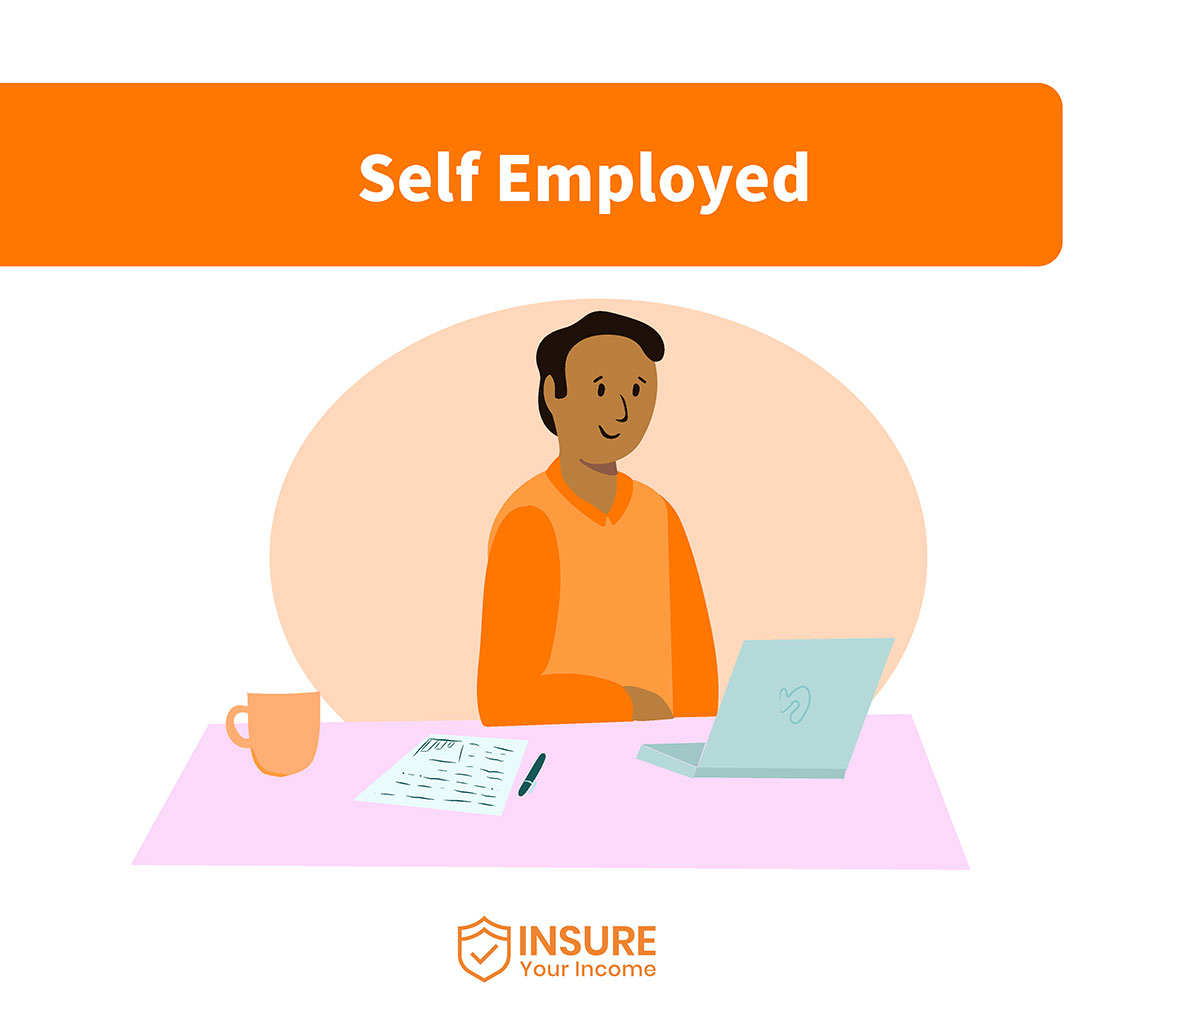 Insure your income for the self employed 